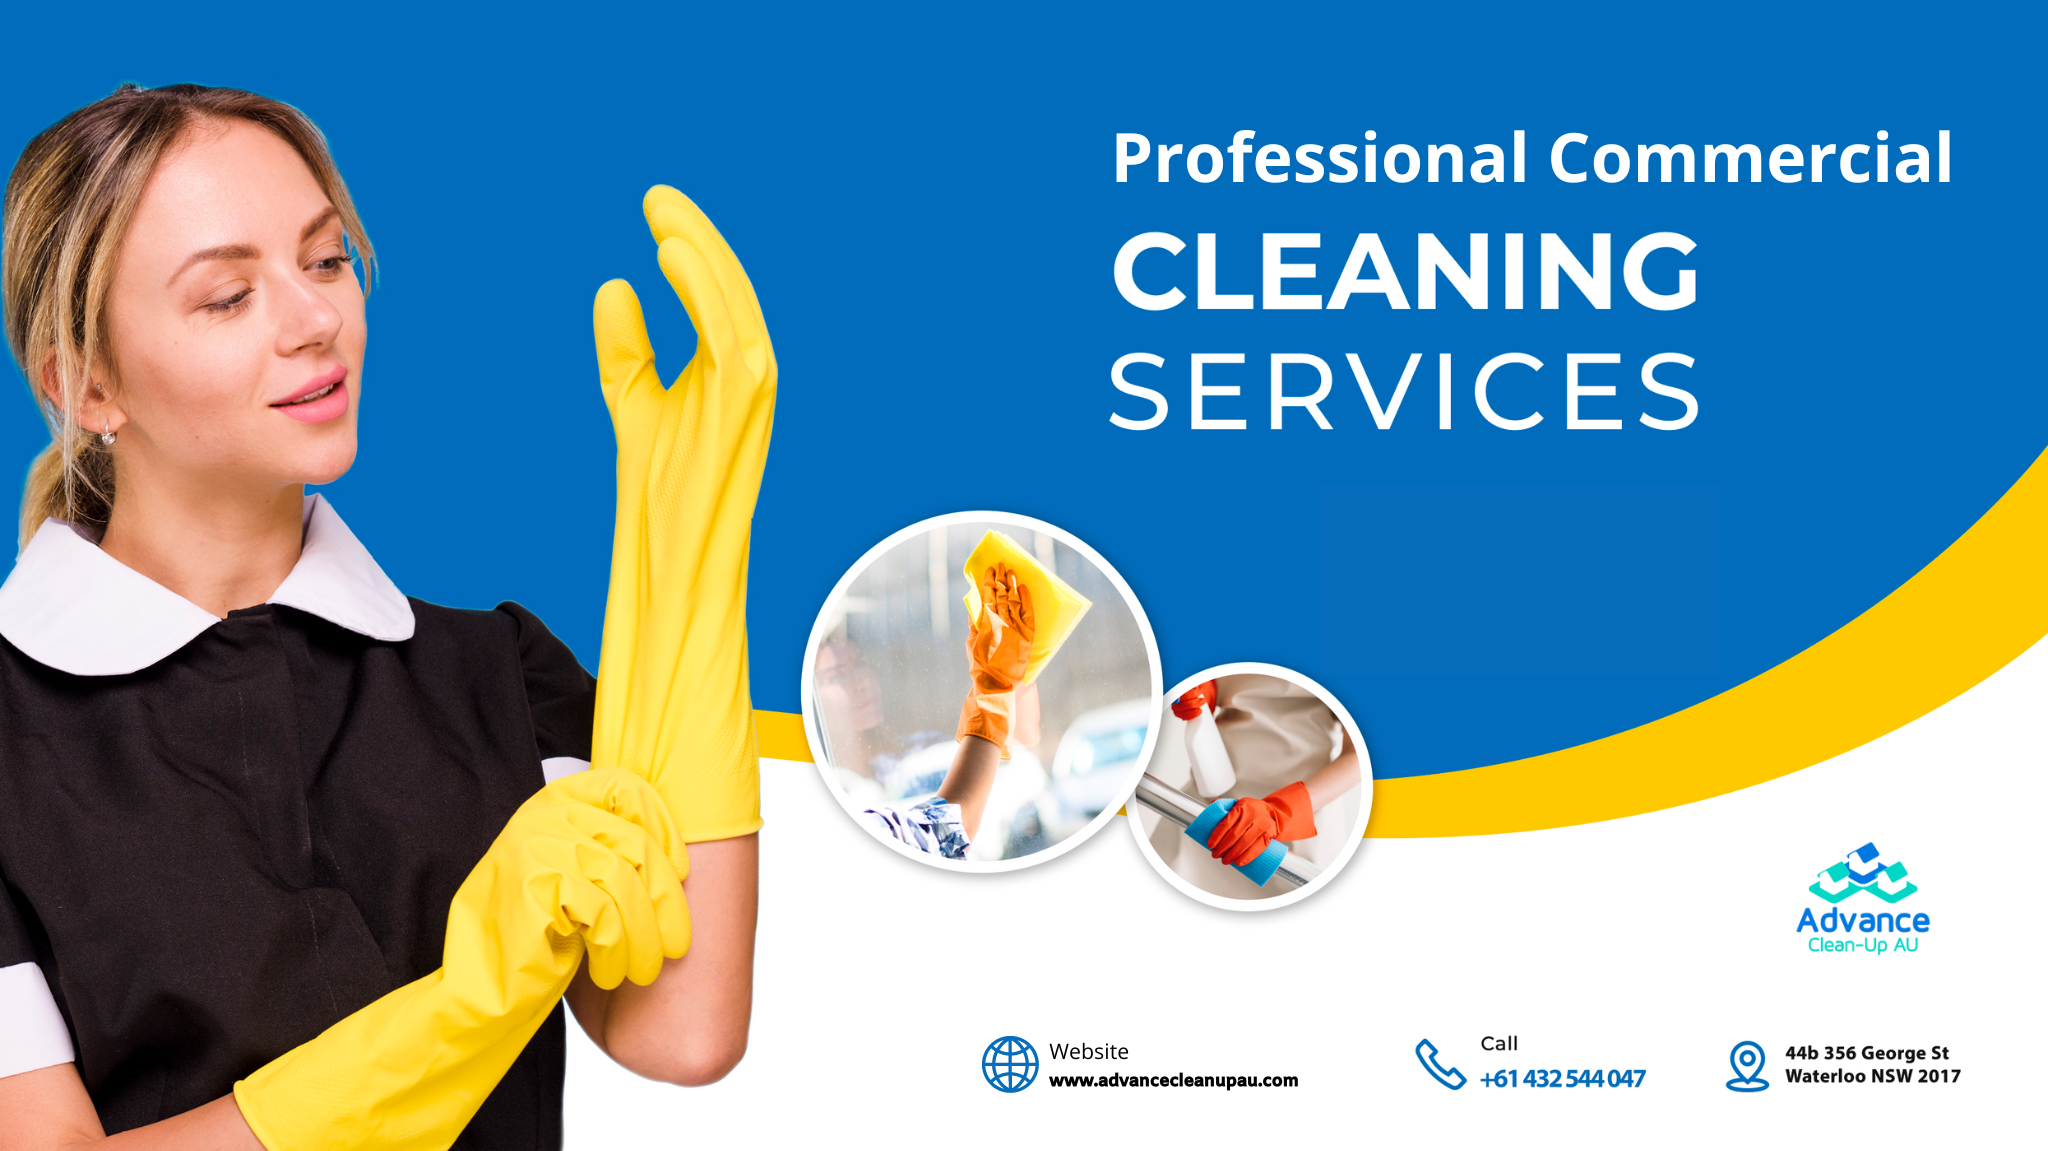 How to hire professional commercial cleaning services? - AtoAllinks